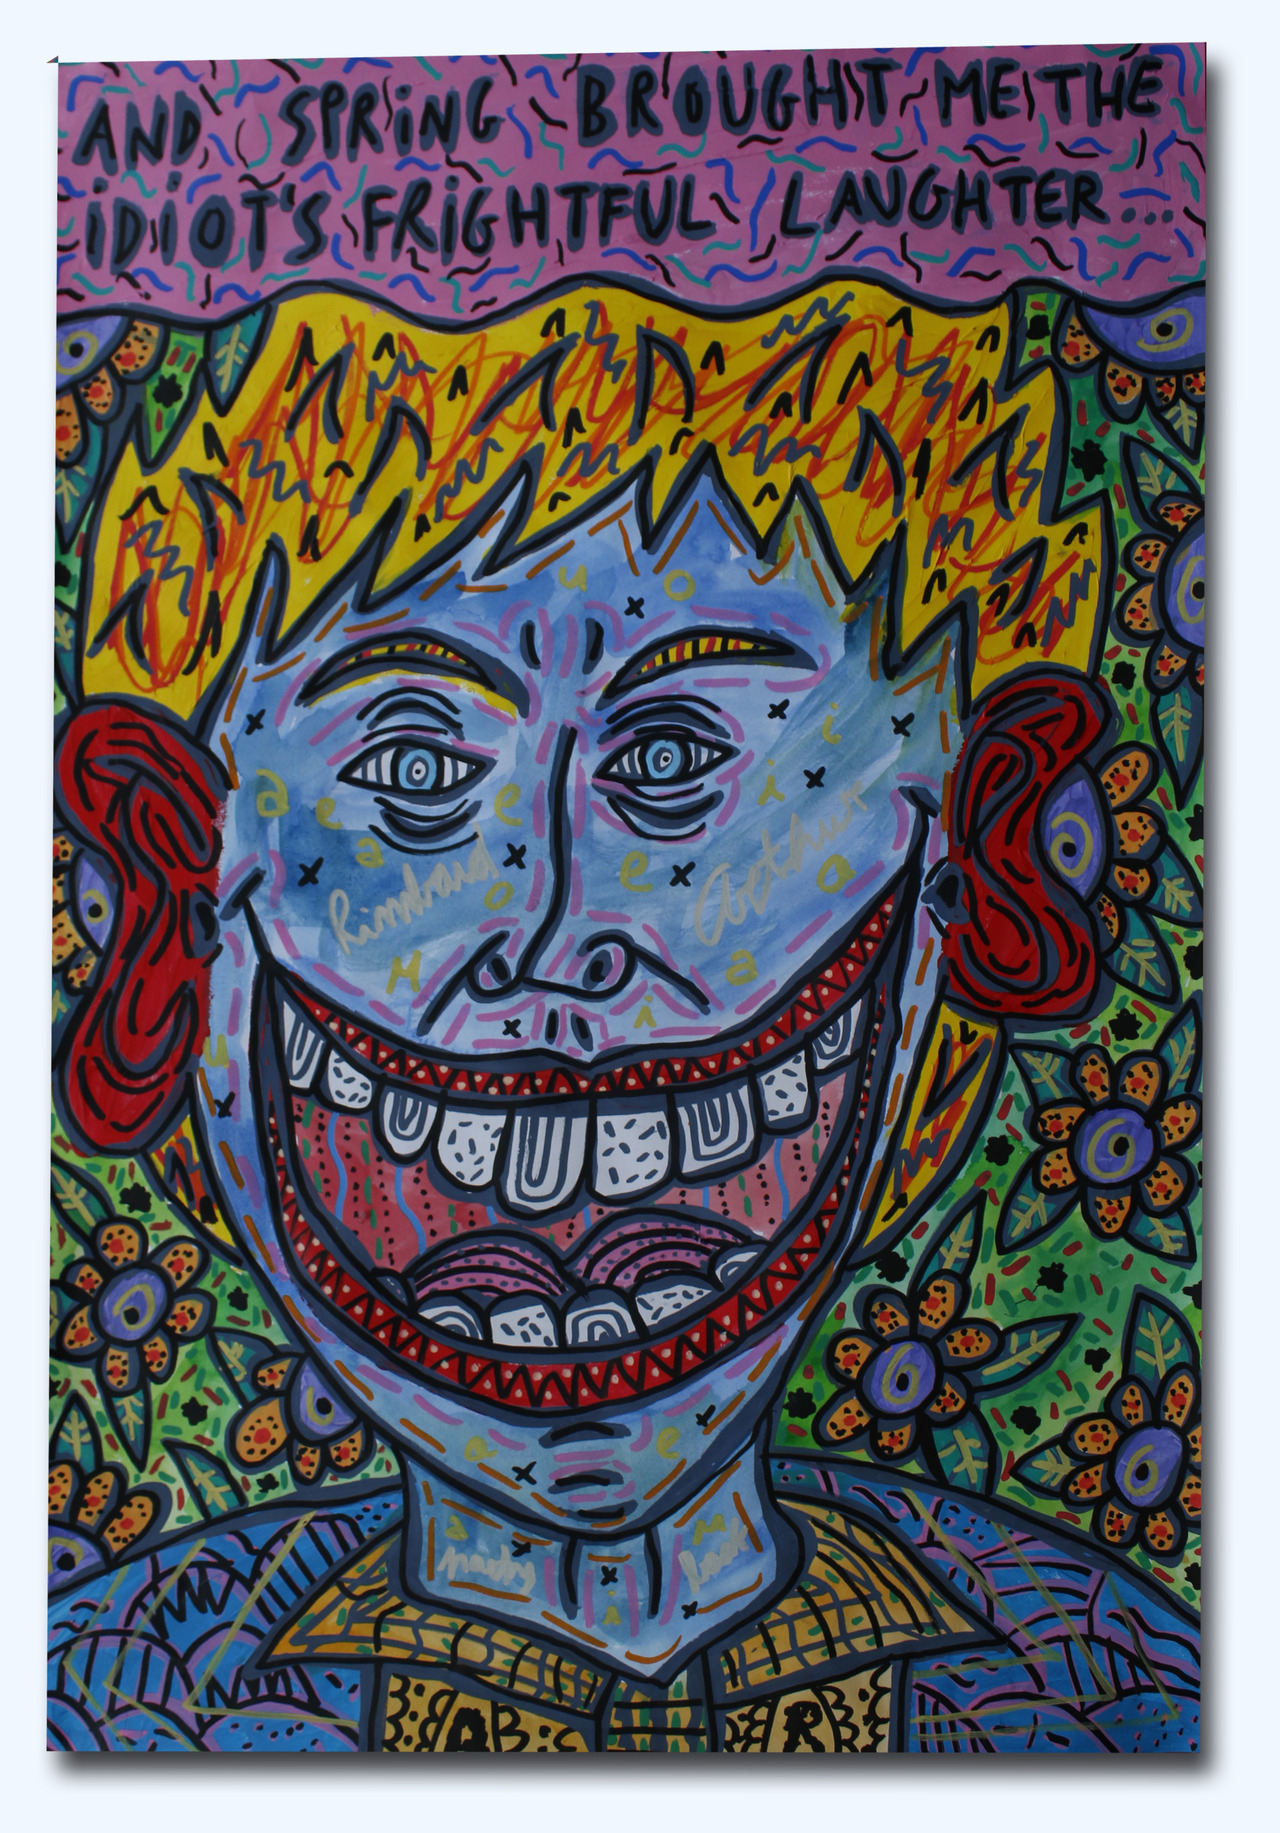    “And spring brought me the idiot's frightful laughter” , 2018   Acrylic and watercoulour paint and Posca marker on paper, 42 x 59.4 cm Private Collection 